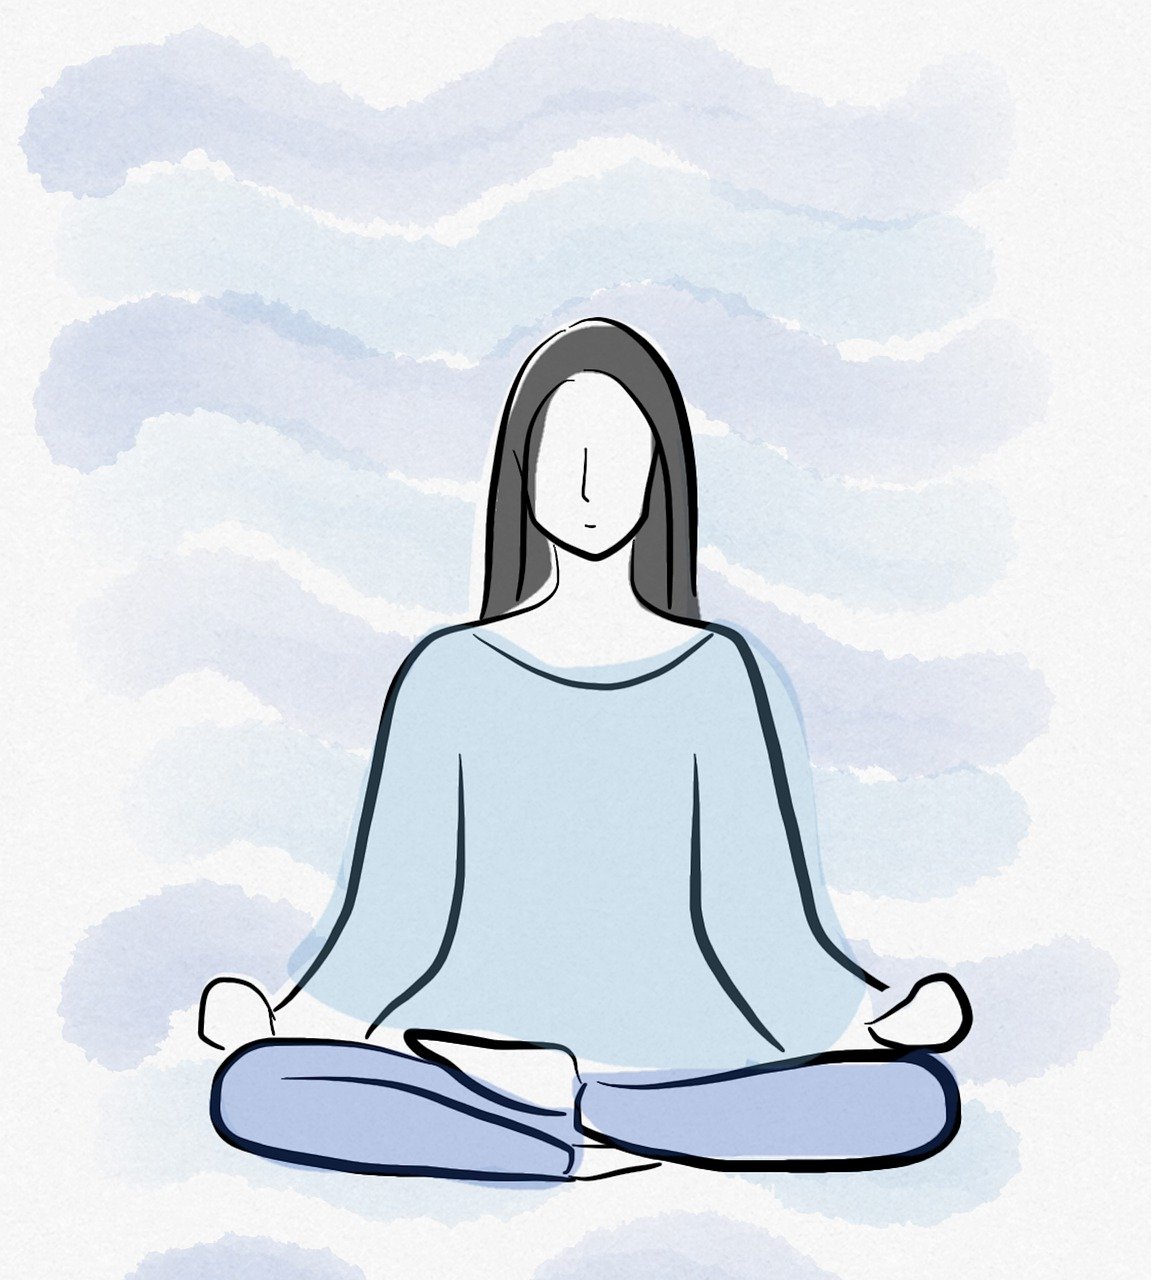 Free Relaxation Meditation illustration and picture